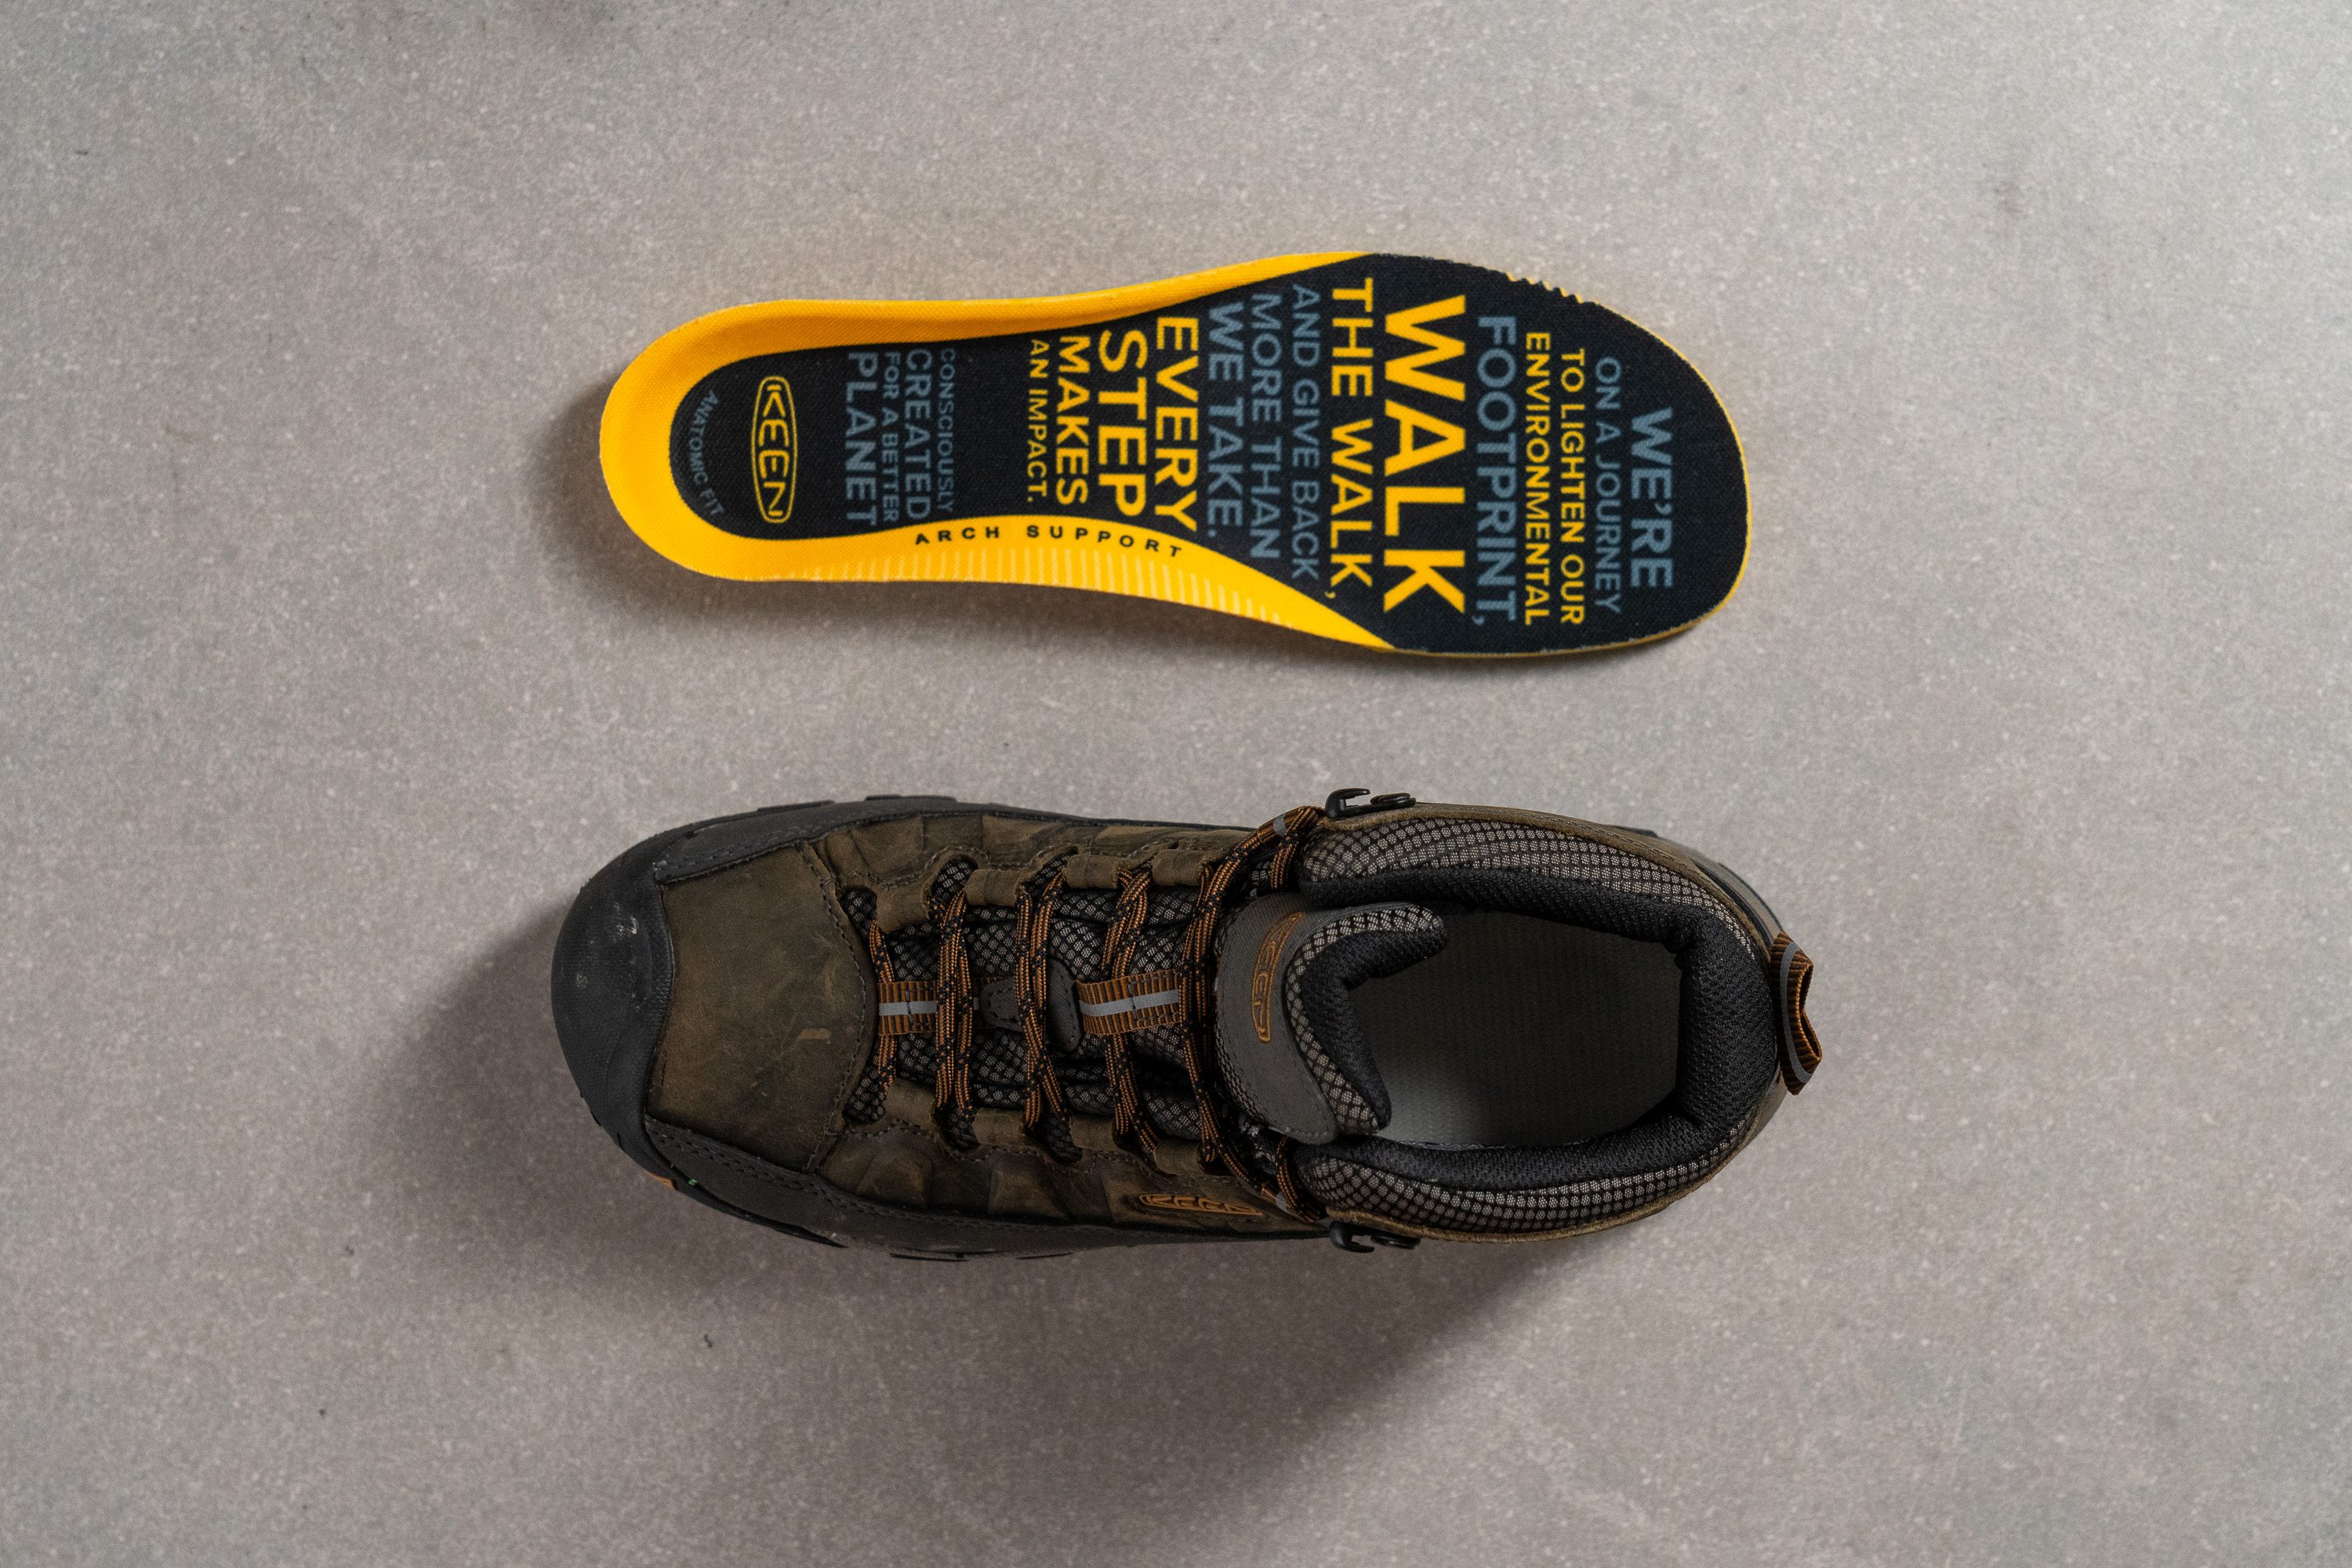 KEEN oz / 425g Removable insole